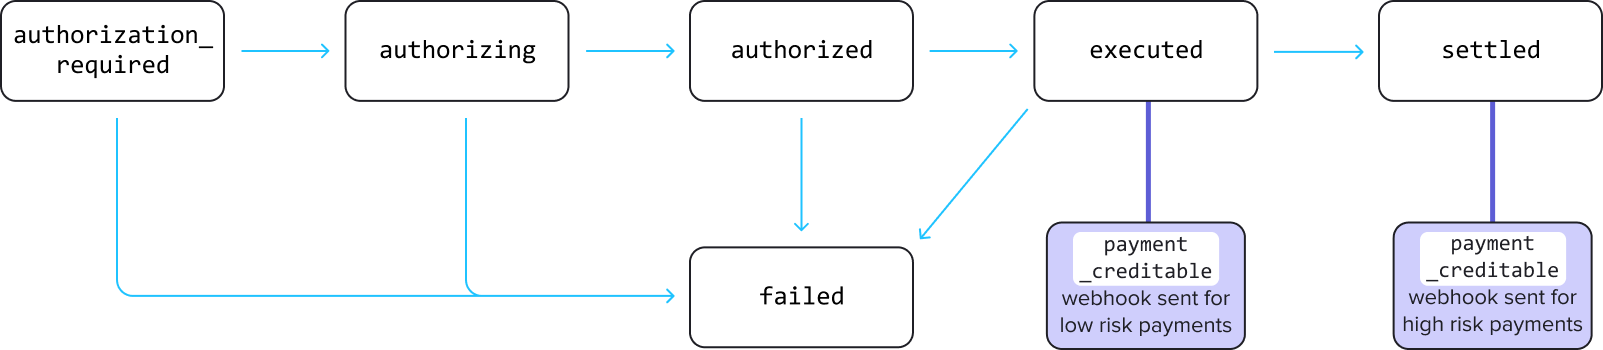 The flow of statuses that a payment follows. The payment_creditable webhook is sent when a payment reaches executed or settled, based on the risk of the payment.